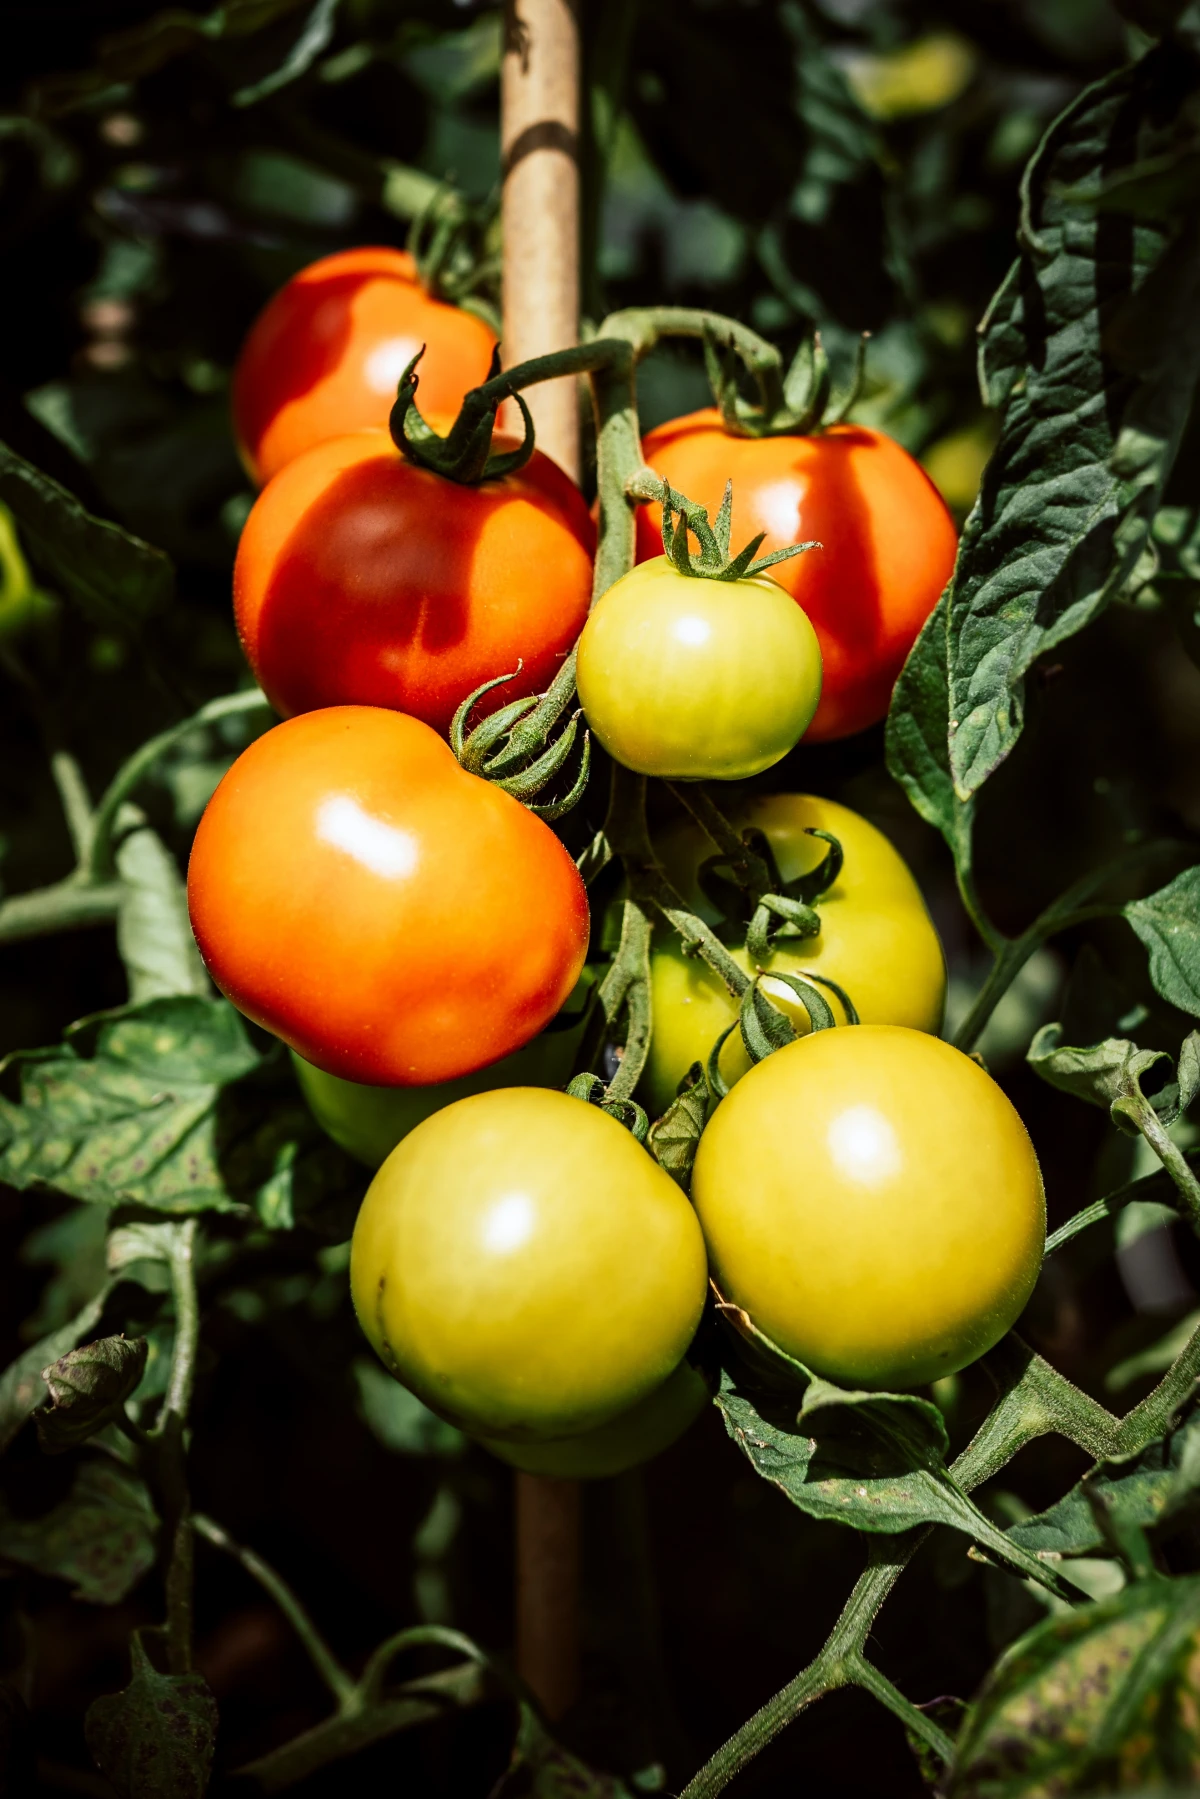 companion plants for tomatoes red and green tomatoes